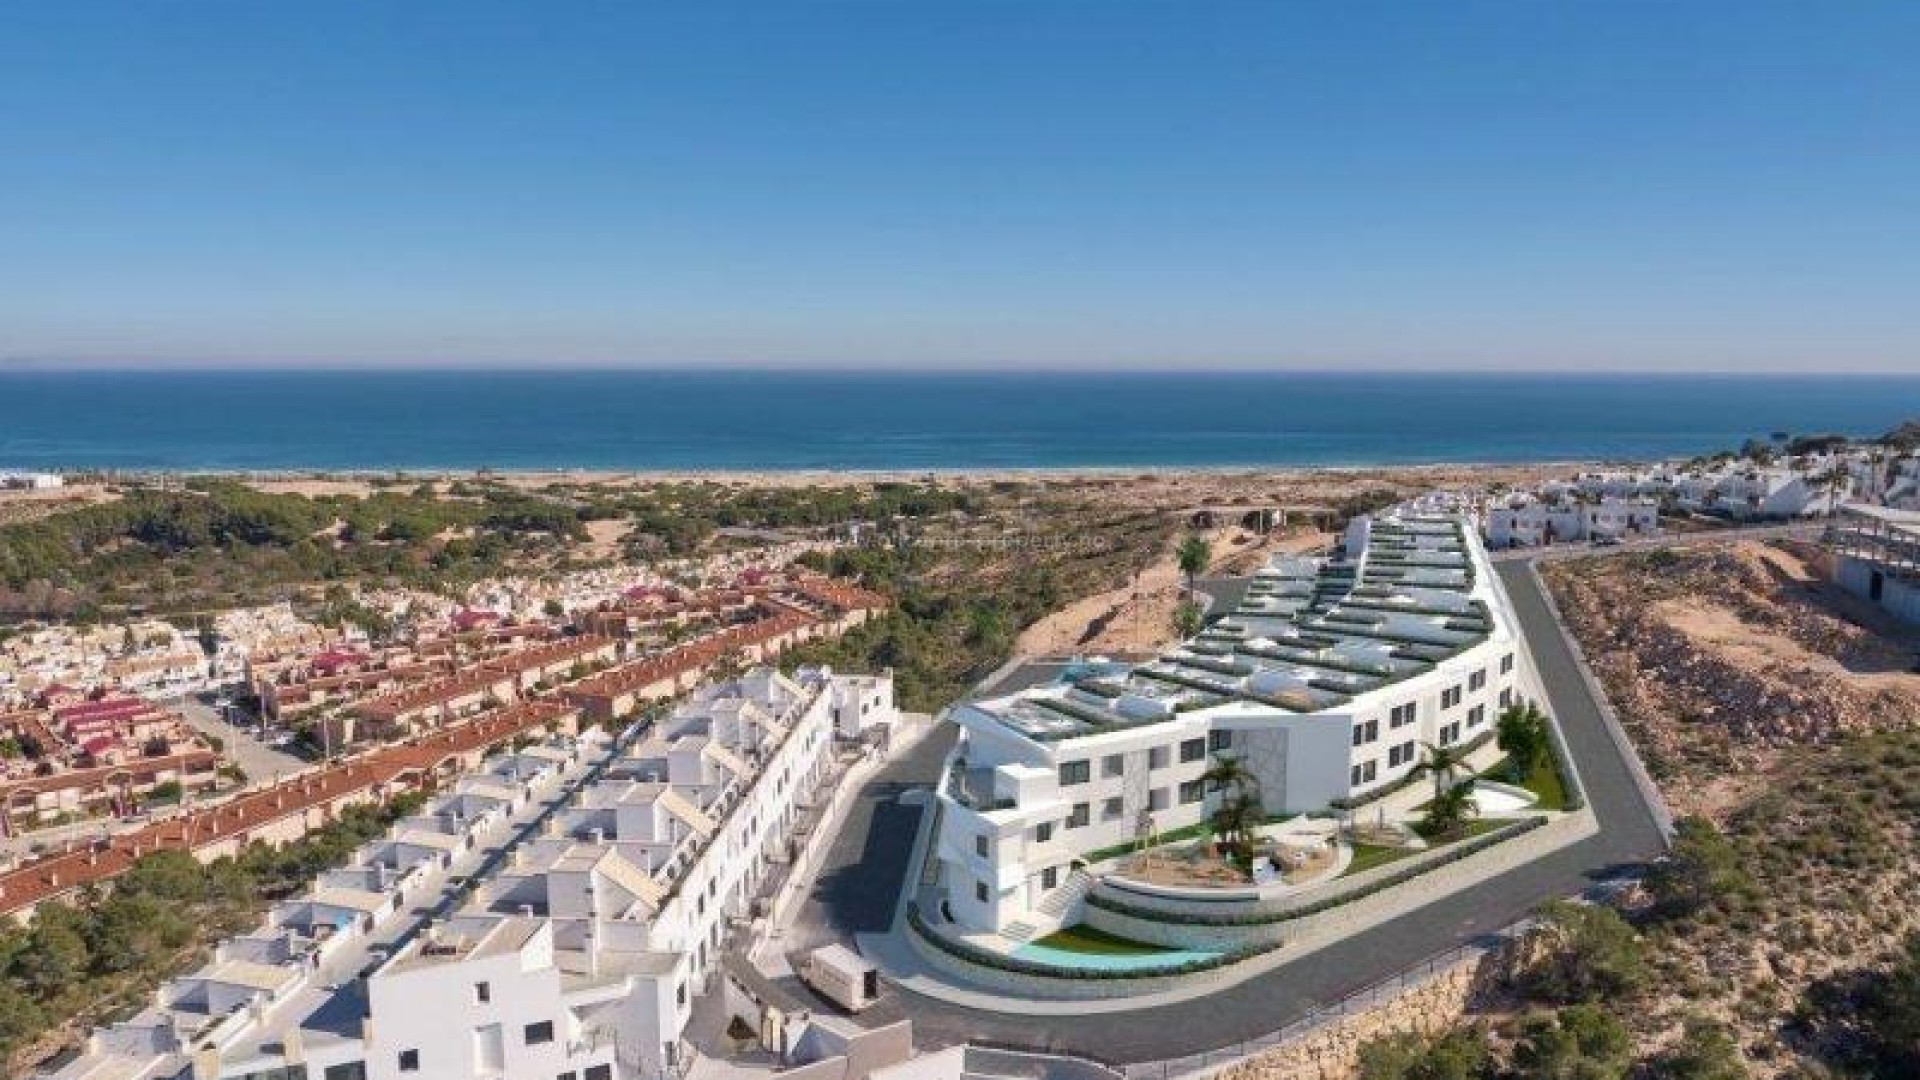 2/3 bedroom apartments in Gran Alacant in Santa Pola with sea views over Carabassi beach, large terrace and private solarium, shared pools, jacuzzi